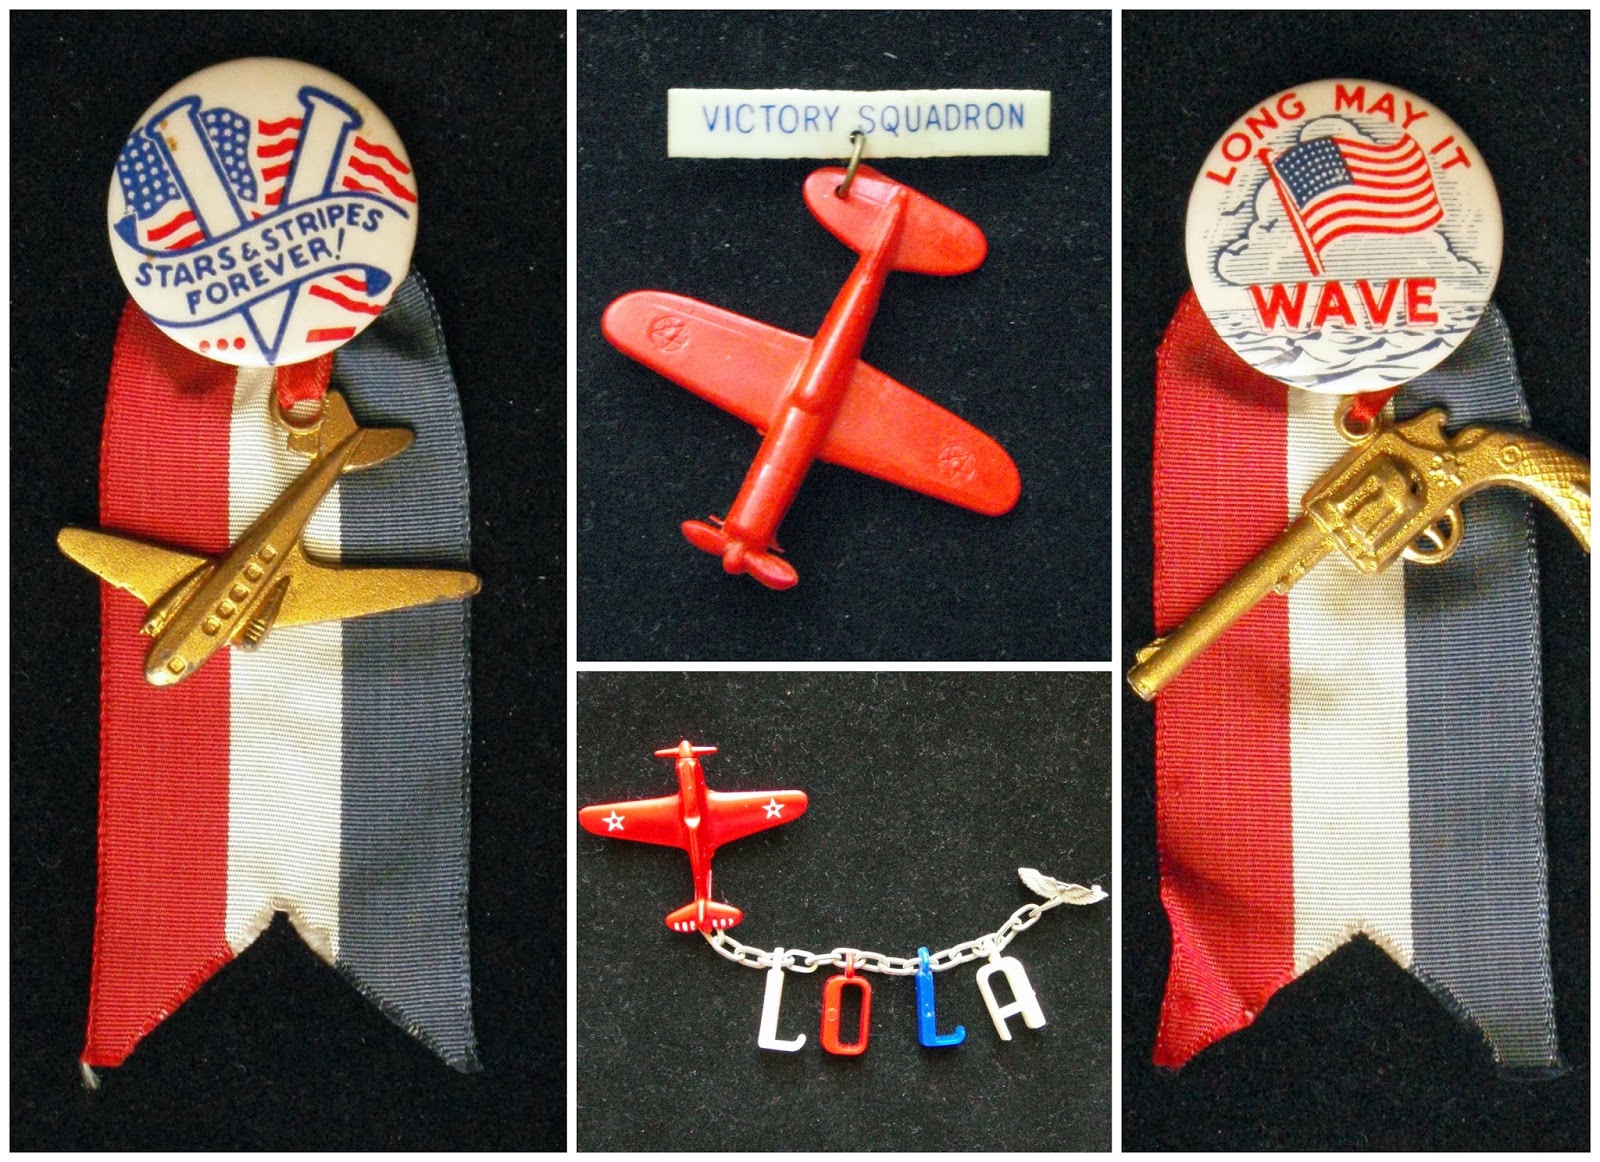 Emilys Vintage Visions Wwii Victory Pins Part 2 Sweetheart Pins